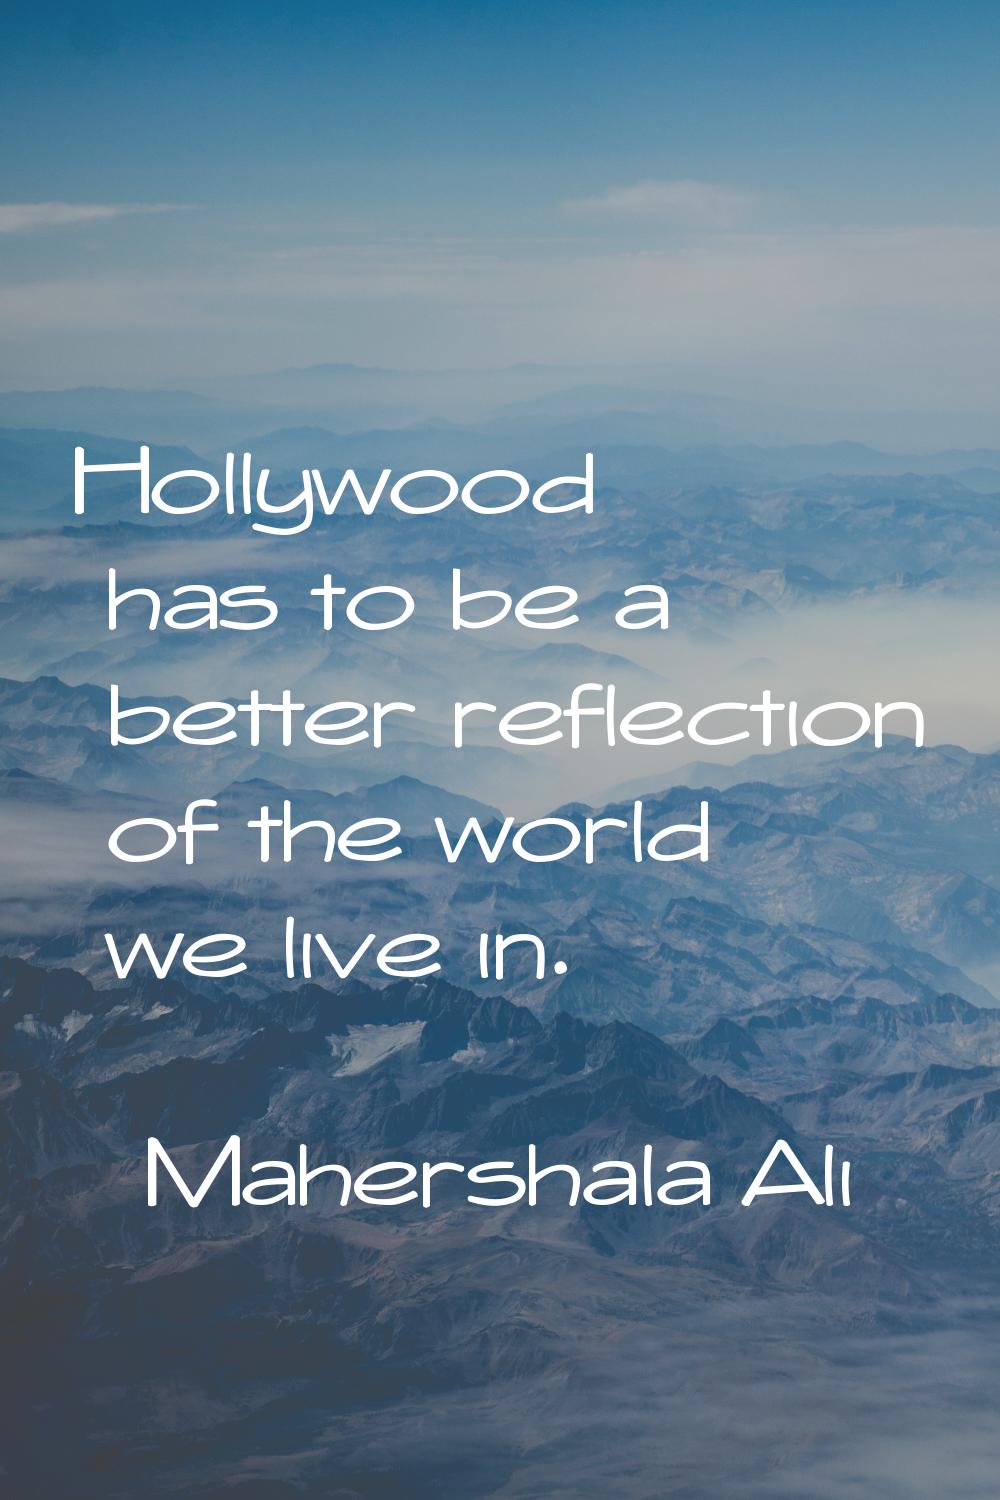 Hollywood has to be a better reflection of the world we live in.